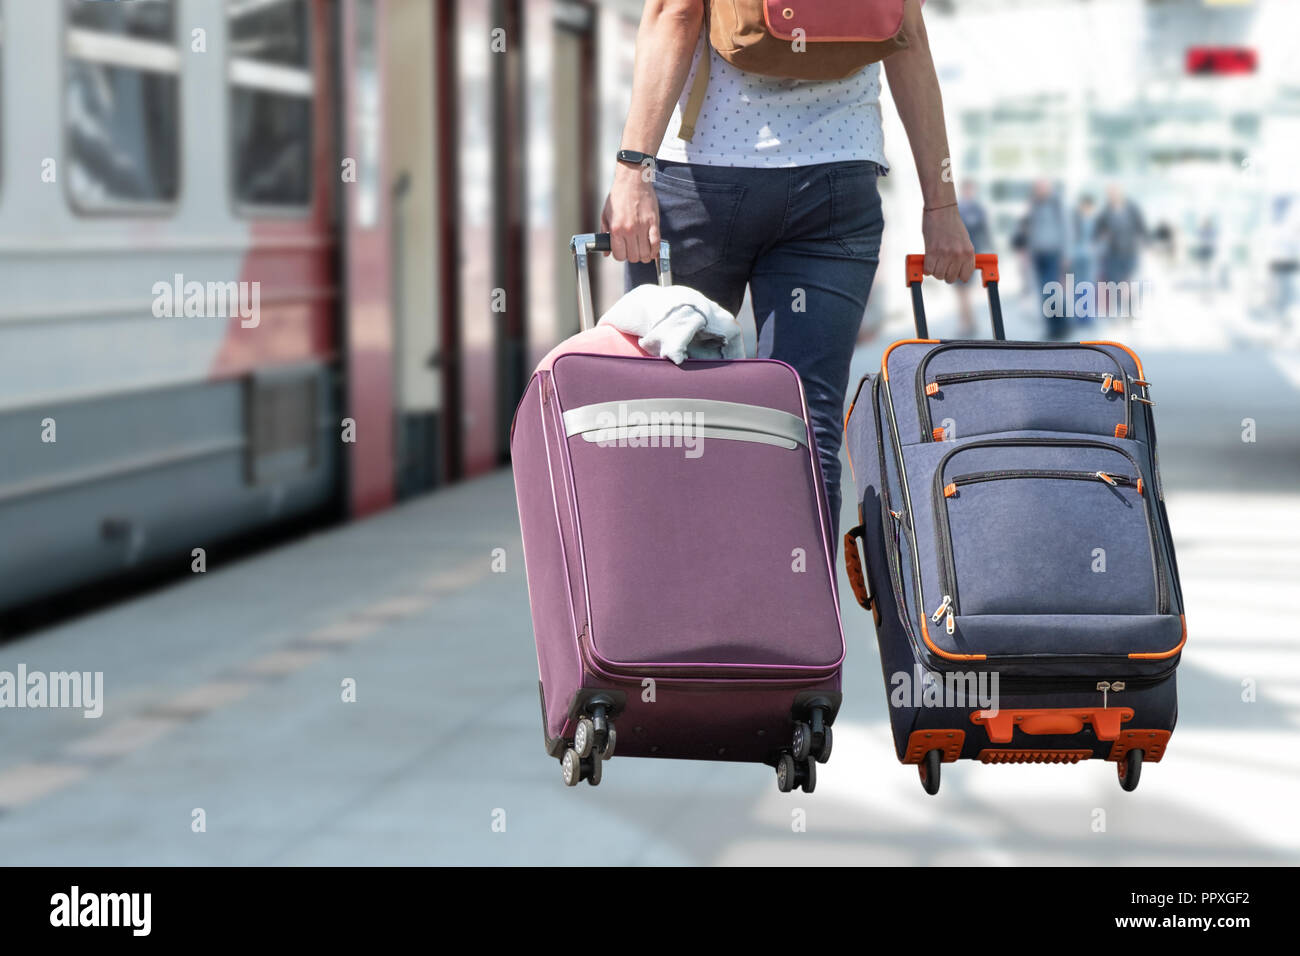 A girl from the back with two suitcases on a blurred background of a railroad train and train. Stock Photo